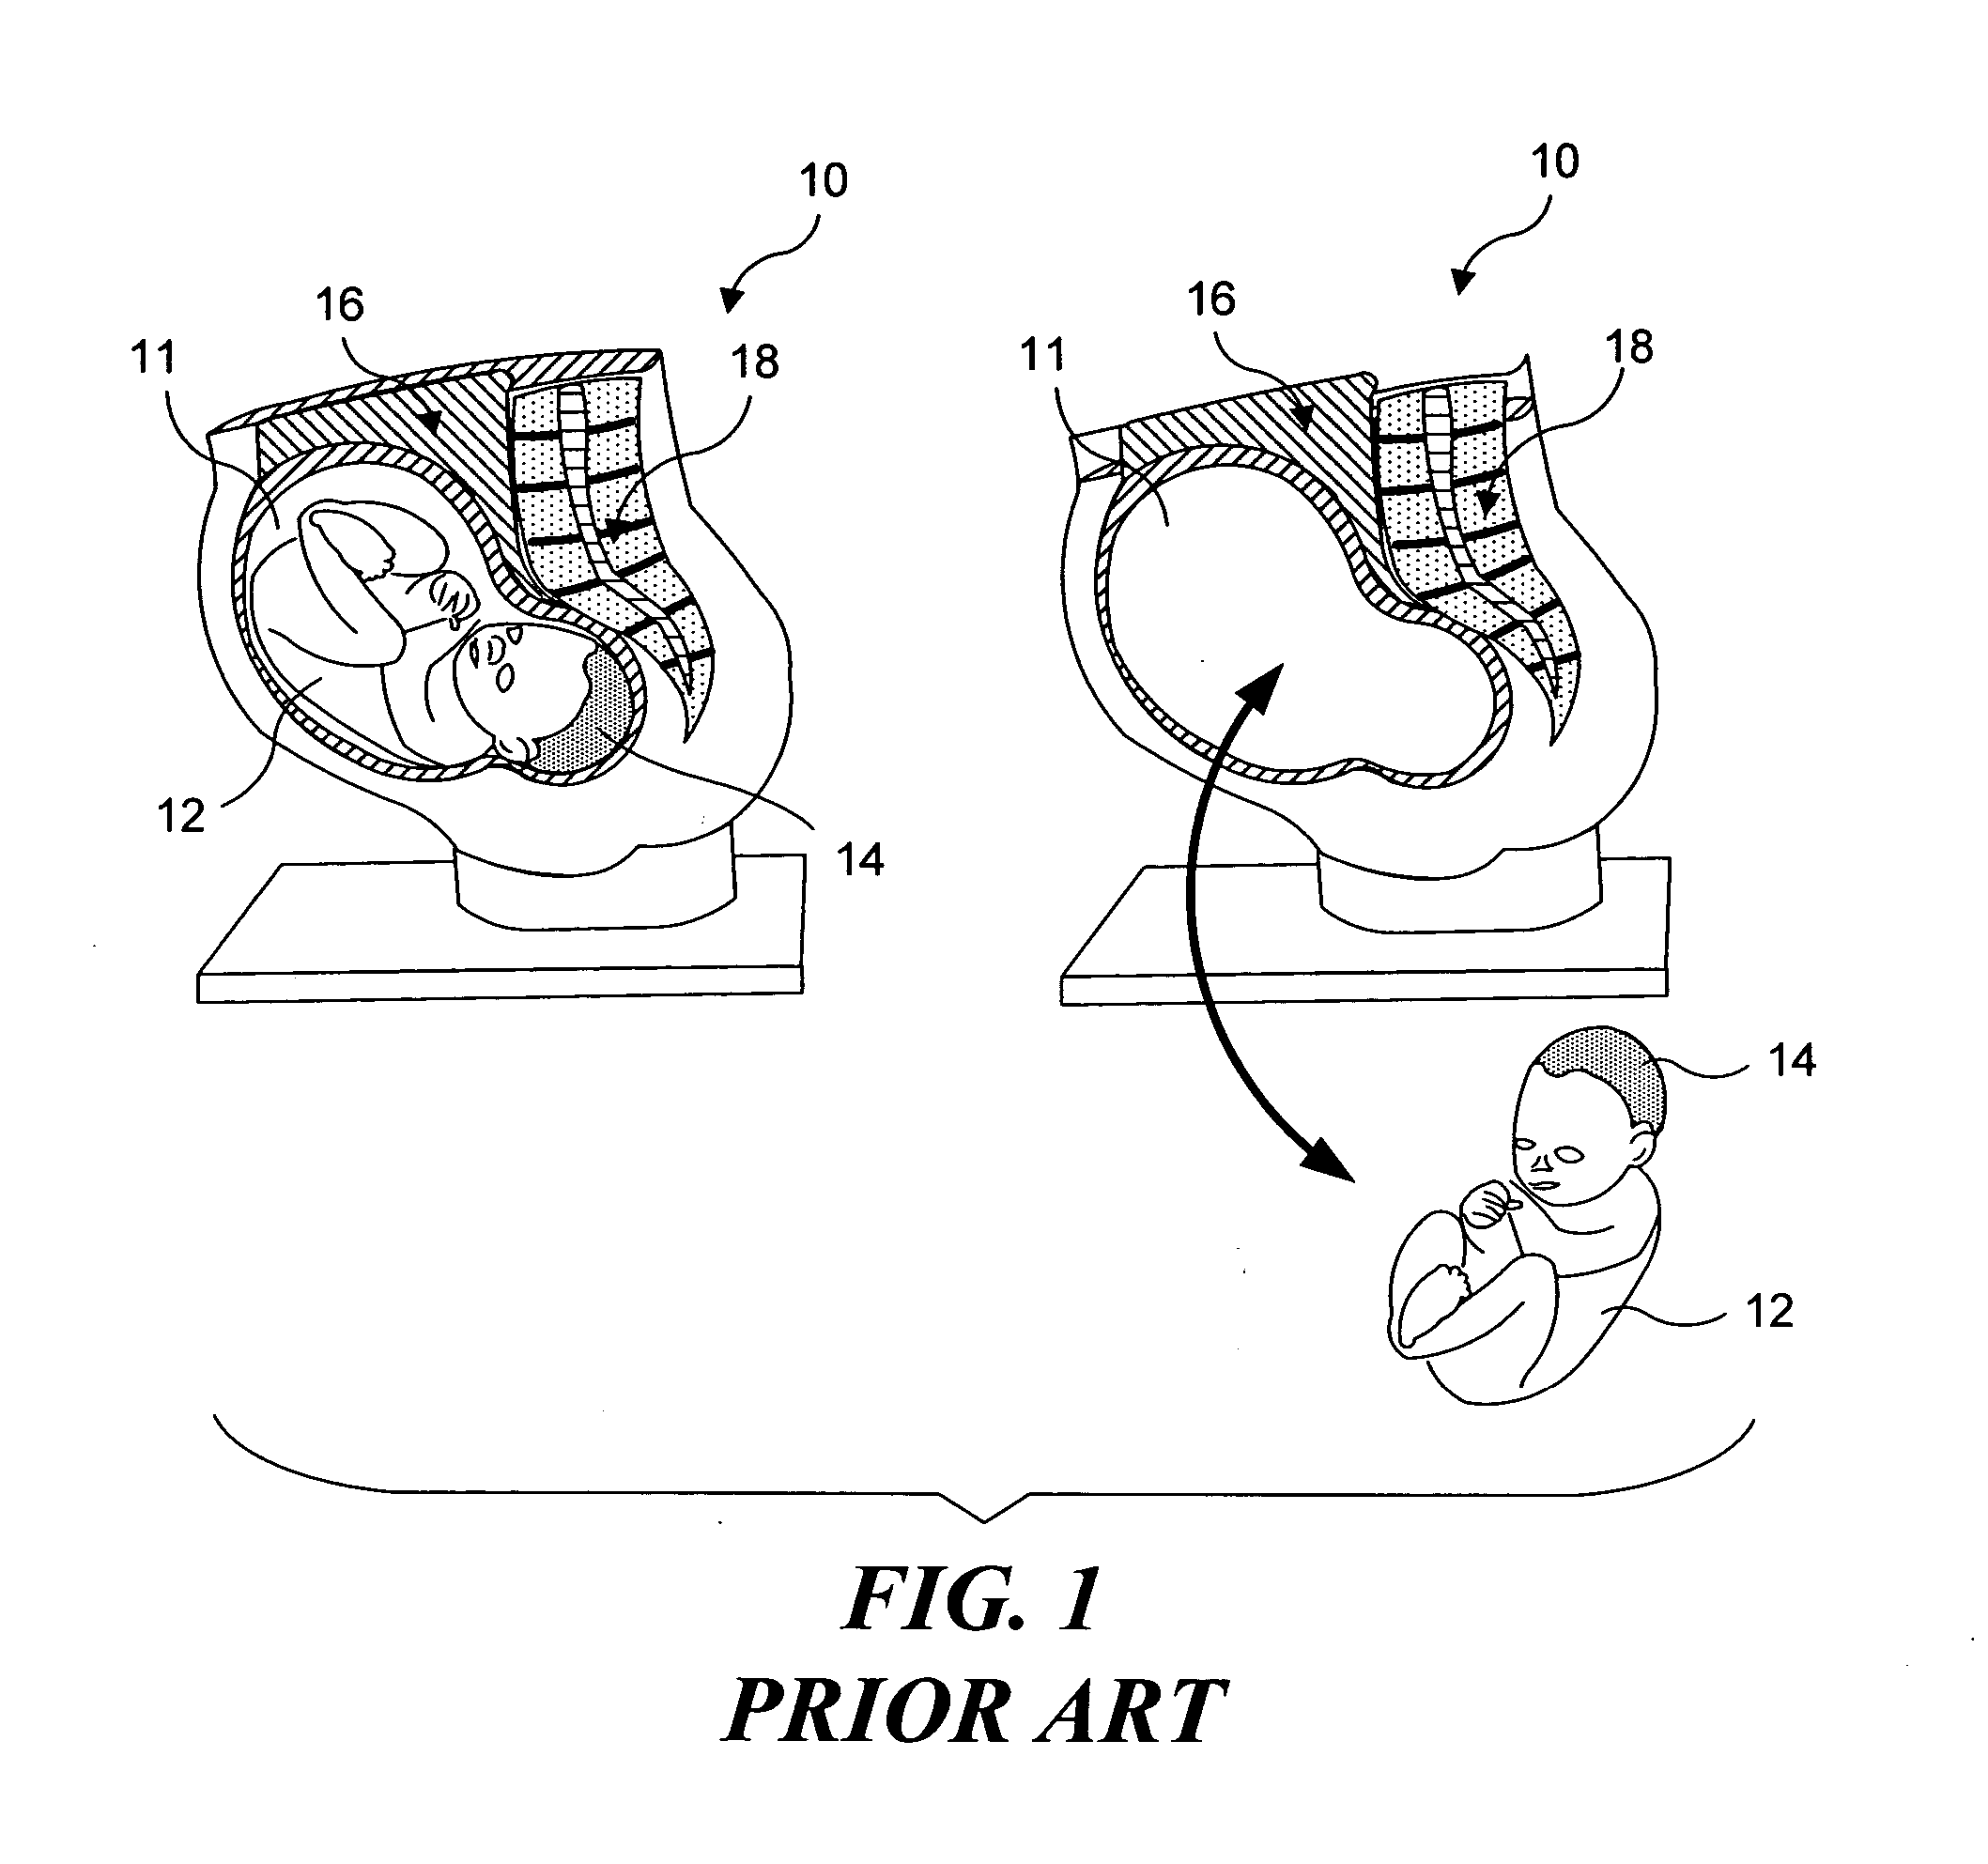 Simulated anatomical structures incorporating an embedded image layer